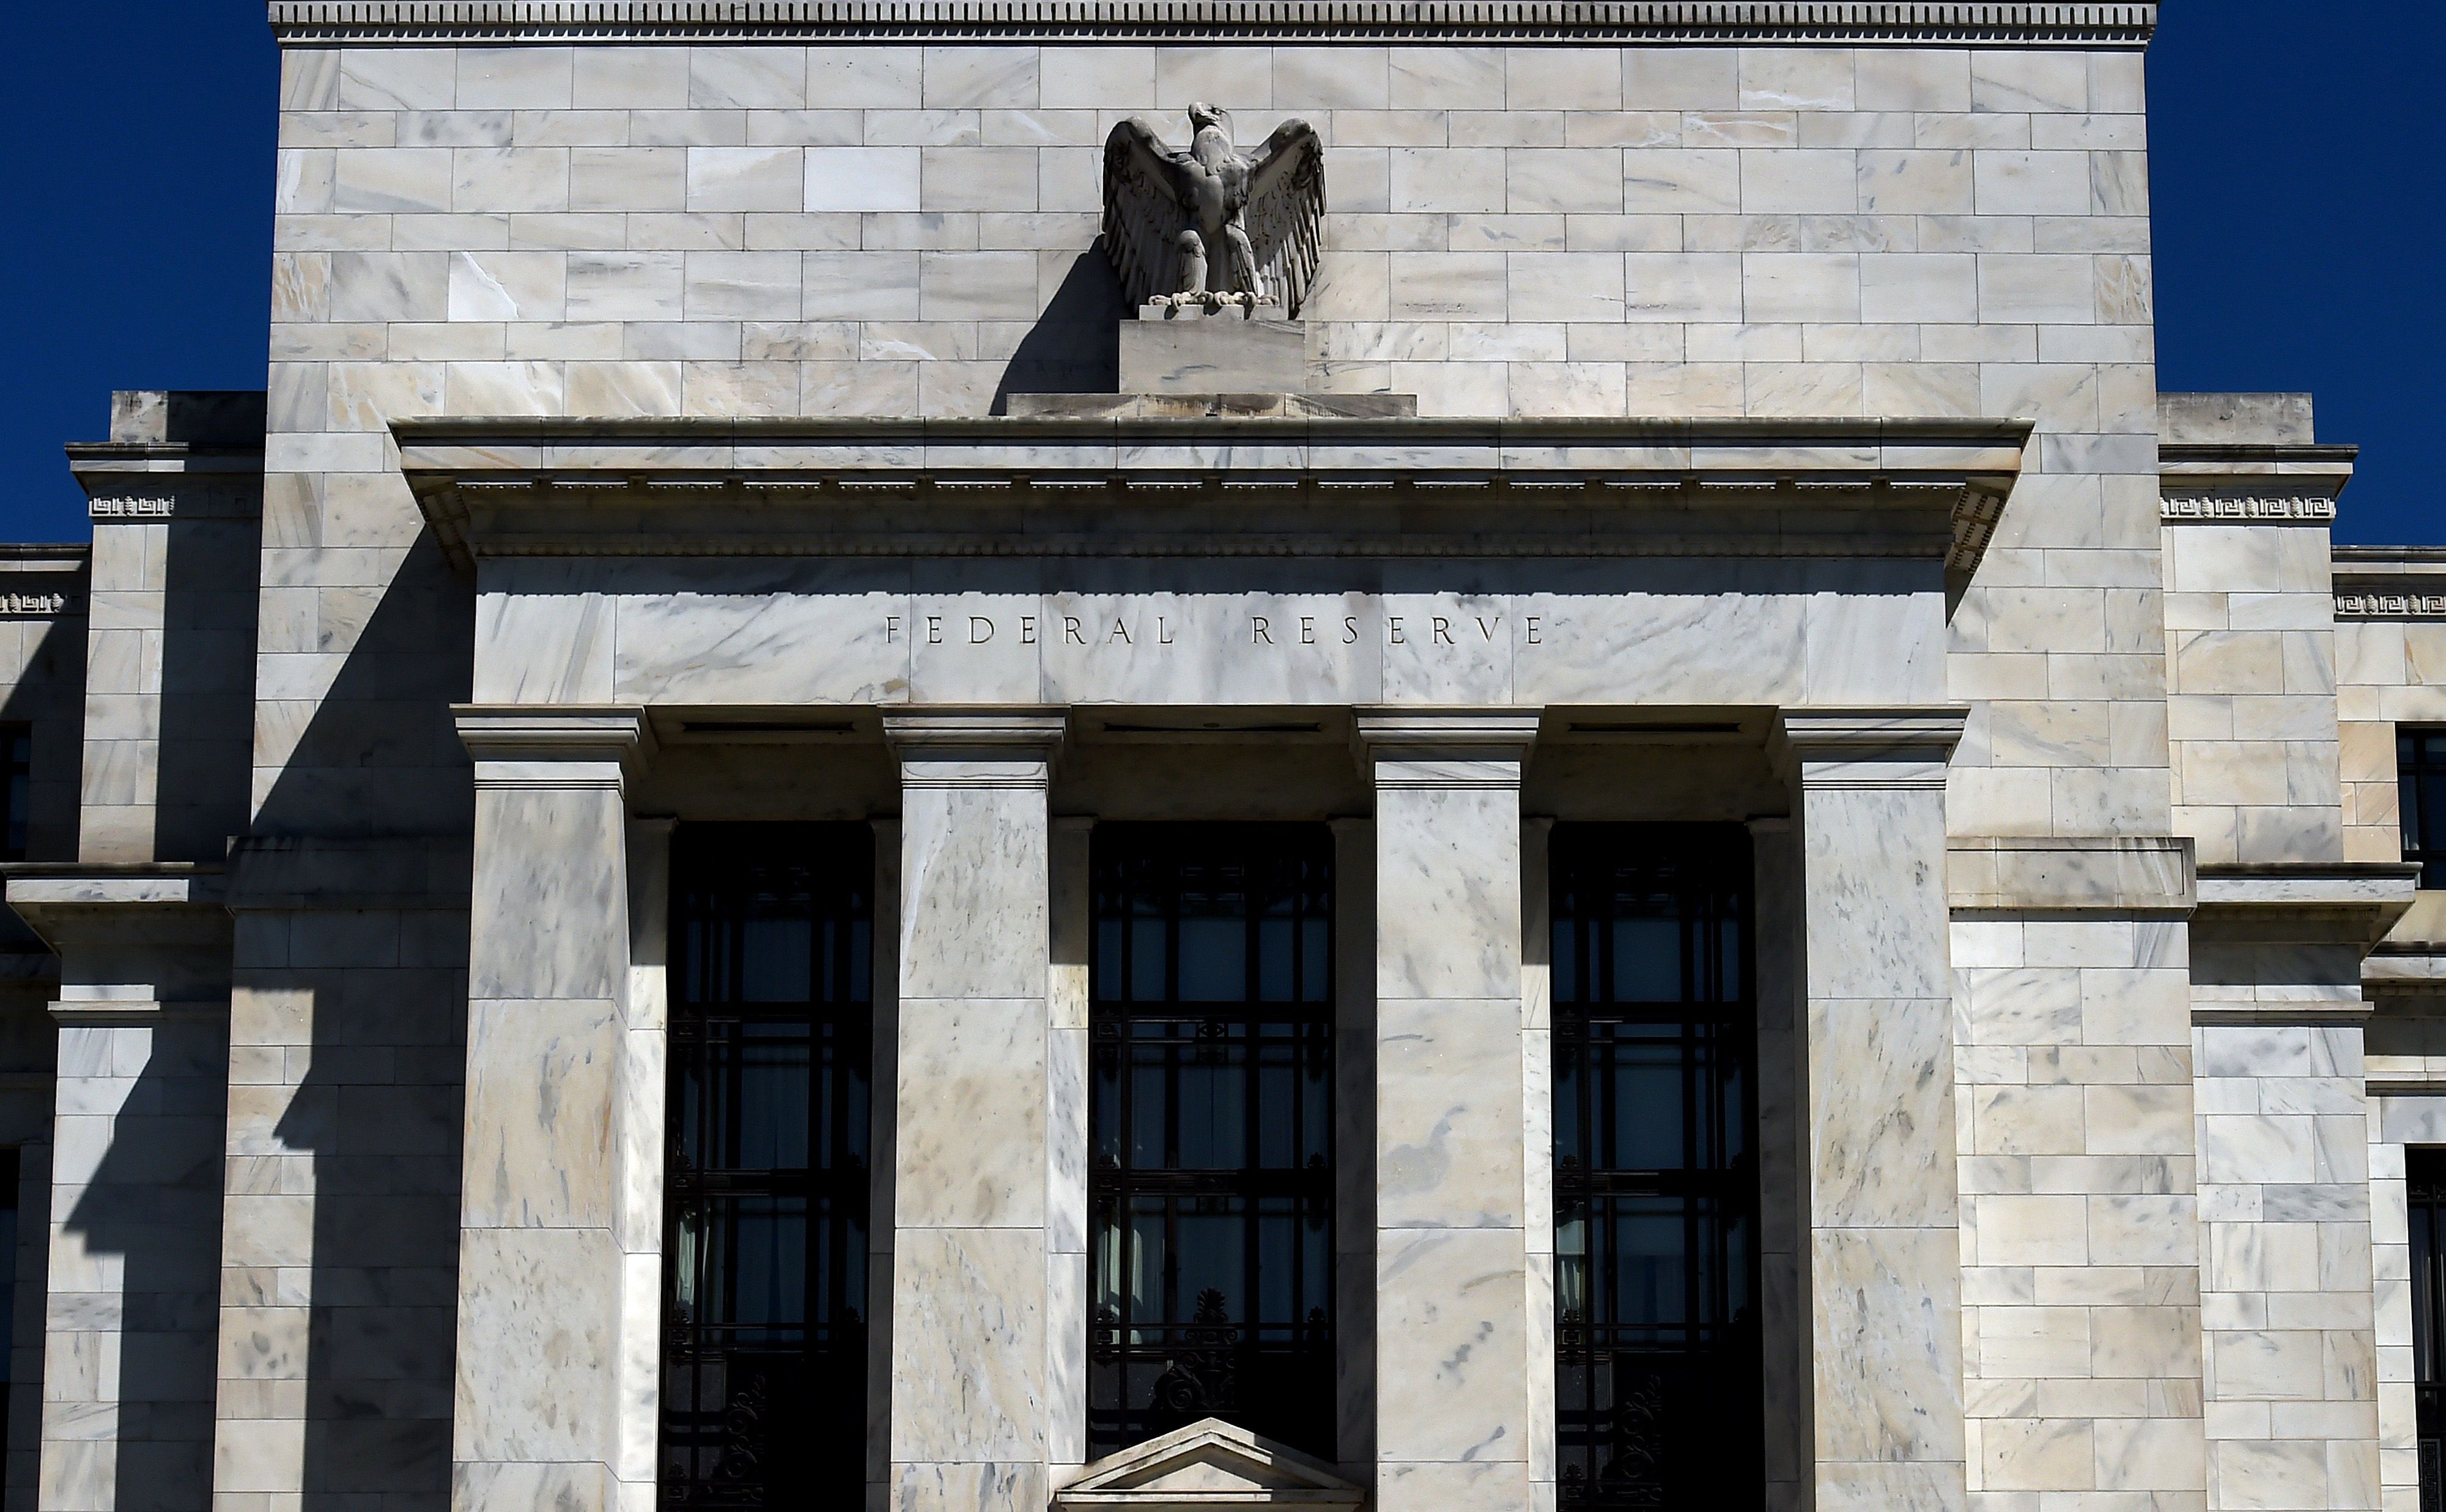 The Federal Reserve building in Washington, DC. (Credit: AFP)